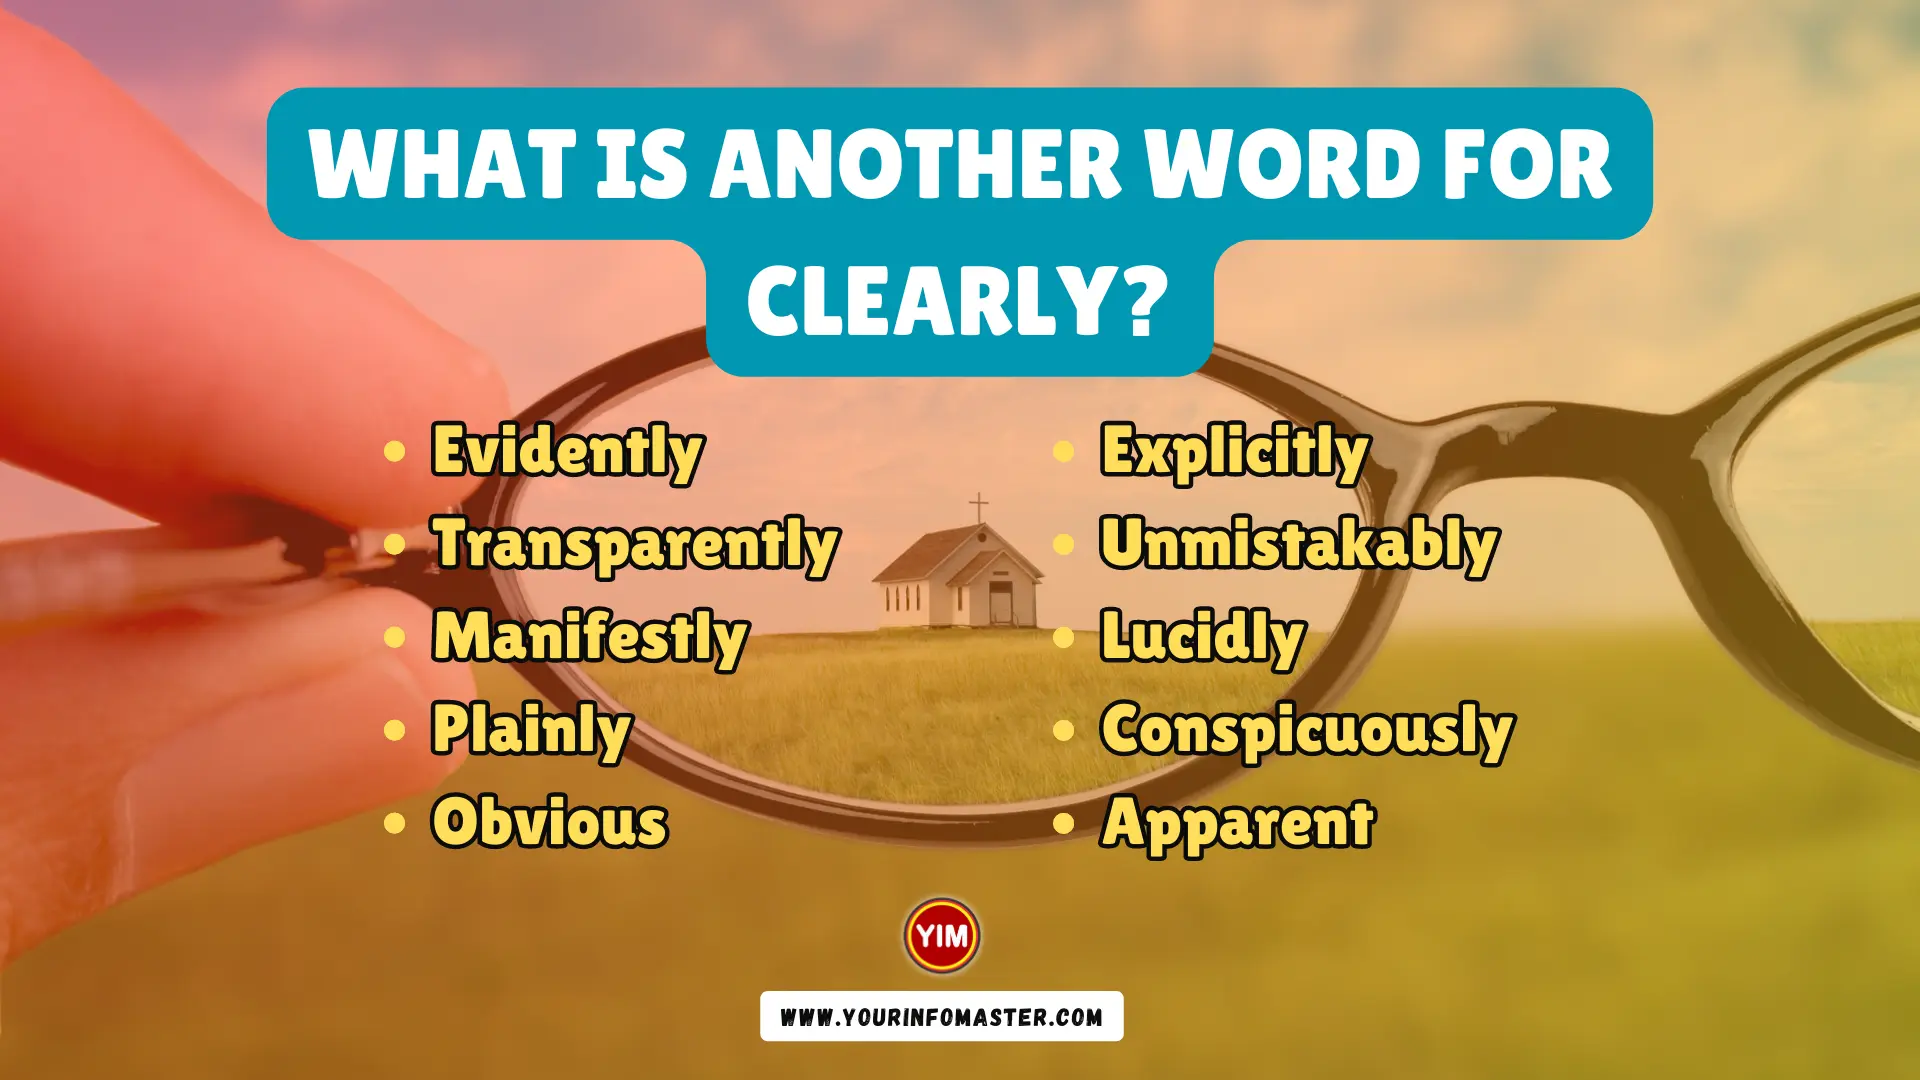 What is another word for Clearly